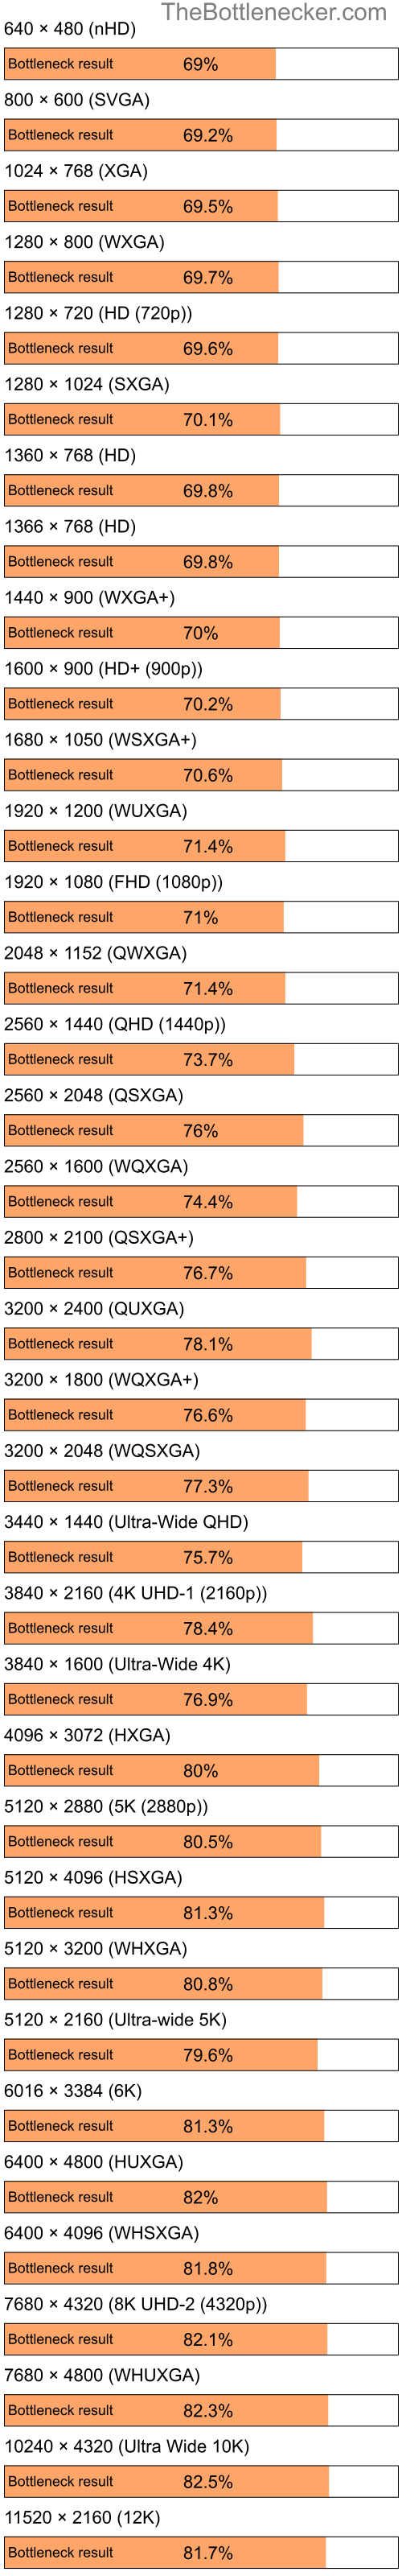 Bottleneck results by resolution for Intel Pentium 4 and AMD Mobility Radeon X600 in General Tasks